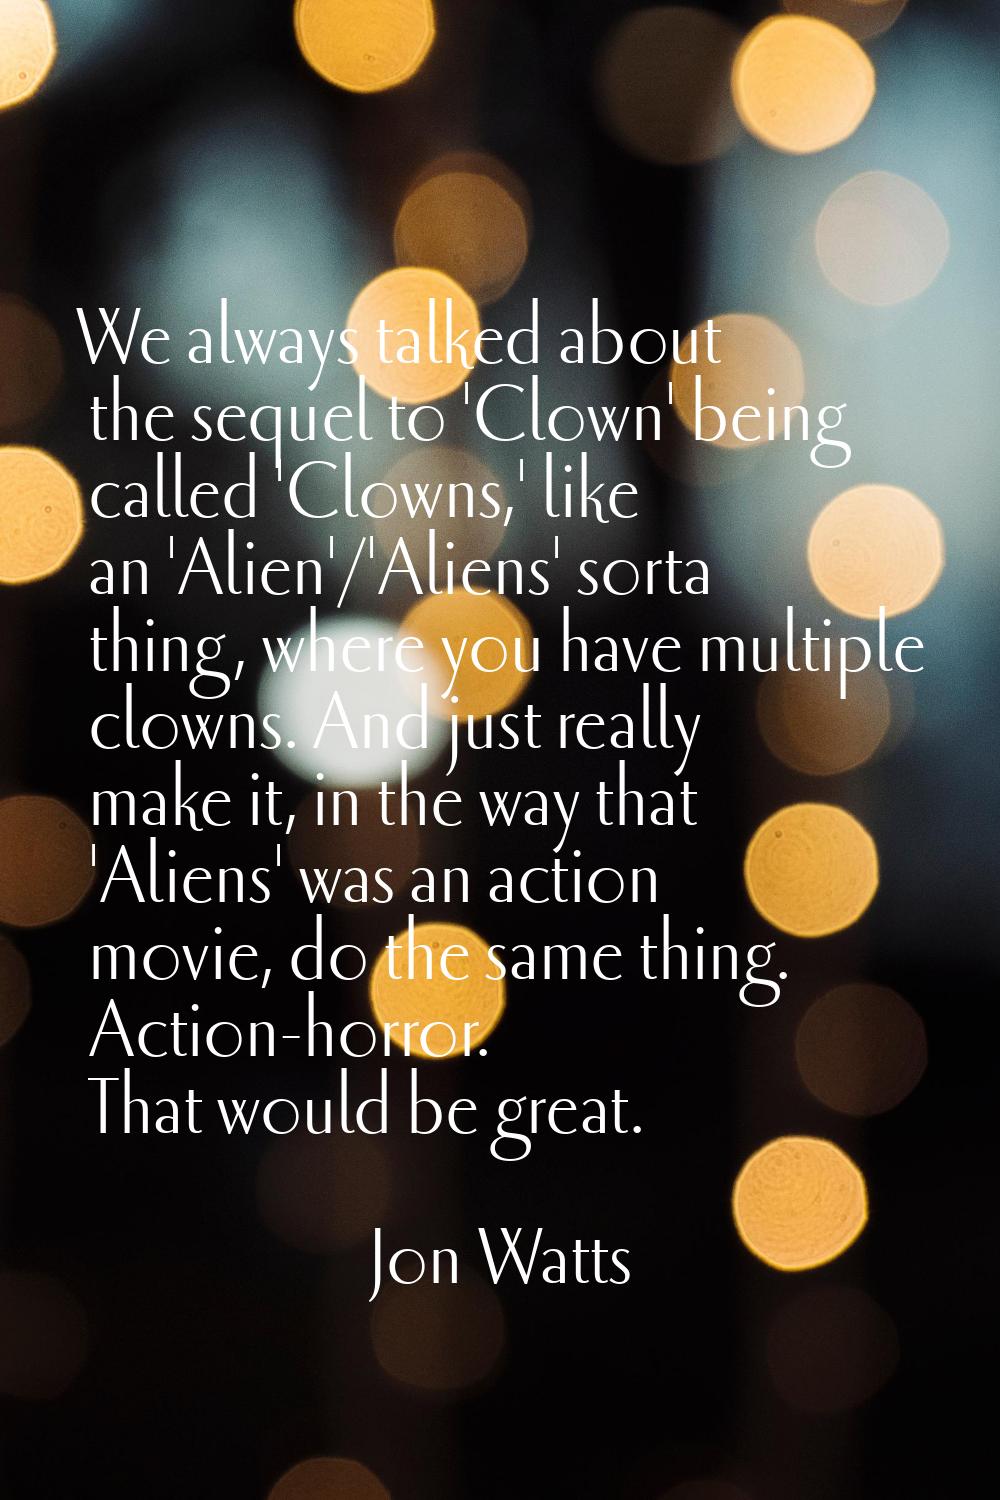 We always talked about the sequel to 'Clown' being called 'Clowns,' like an 'Alien'/'Aliens' sorta 